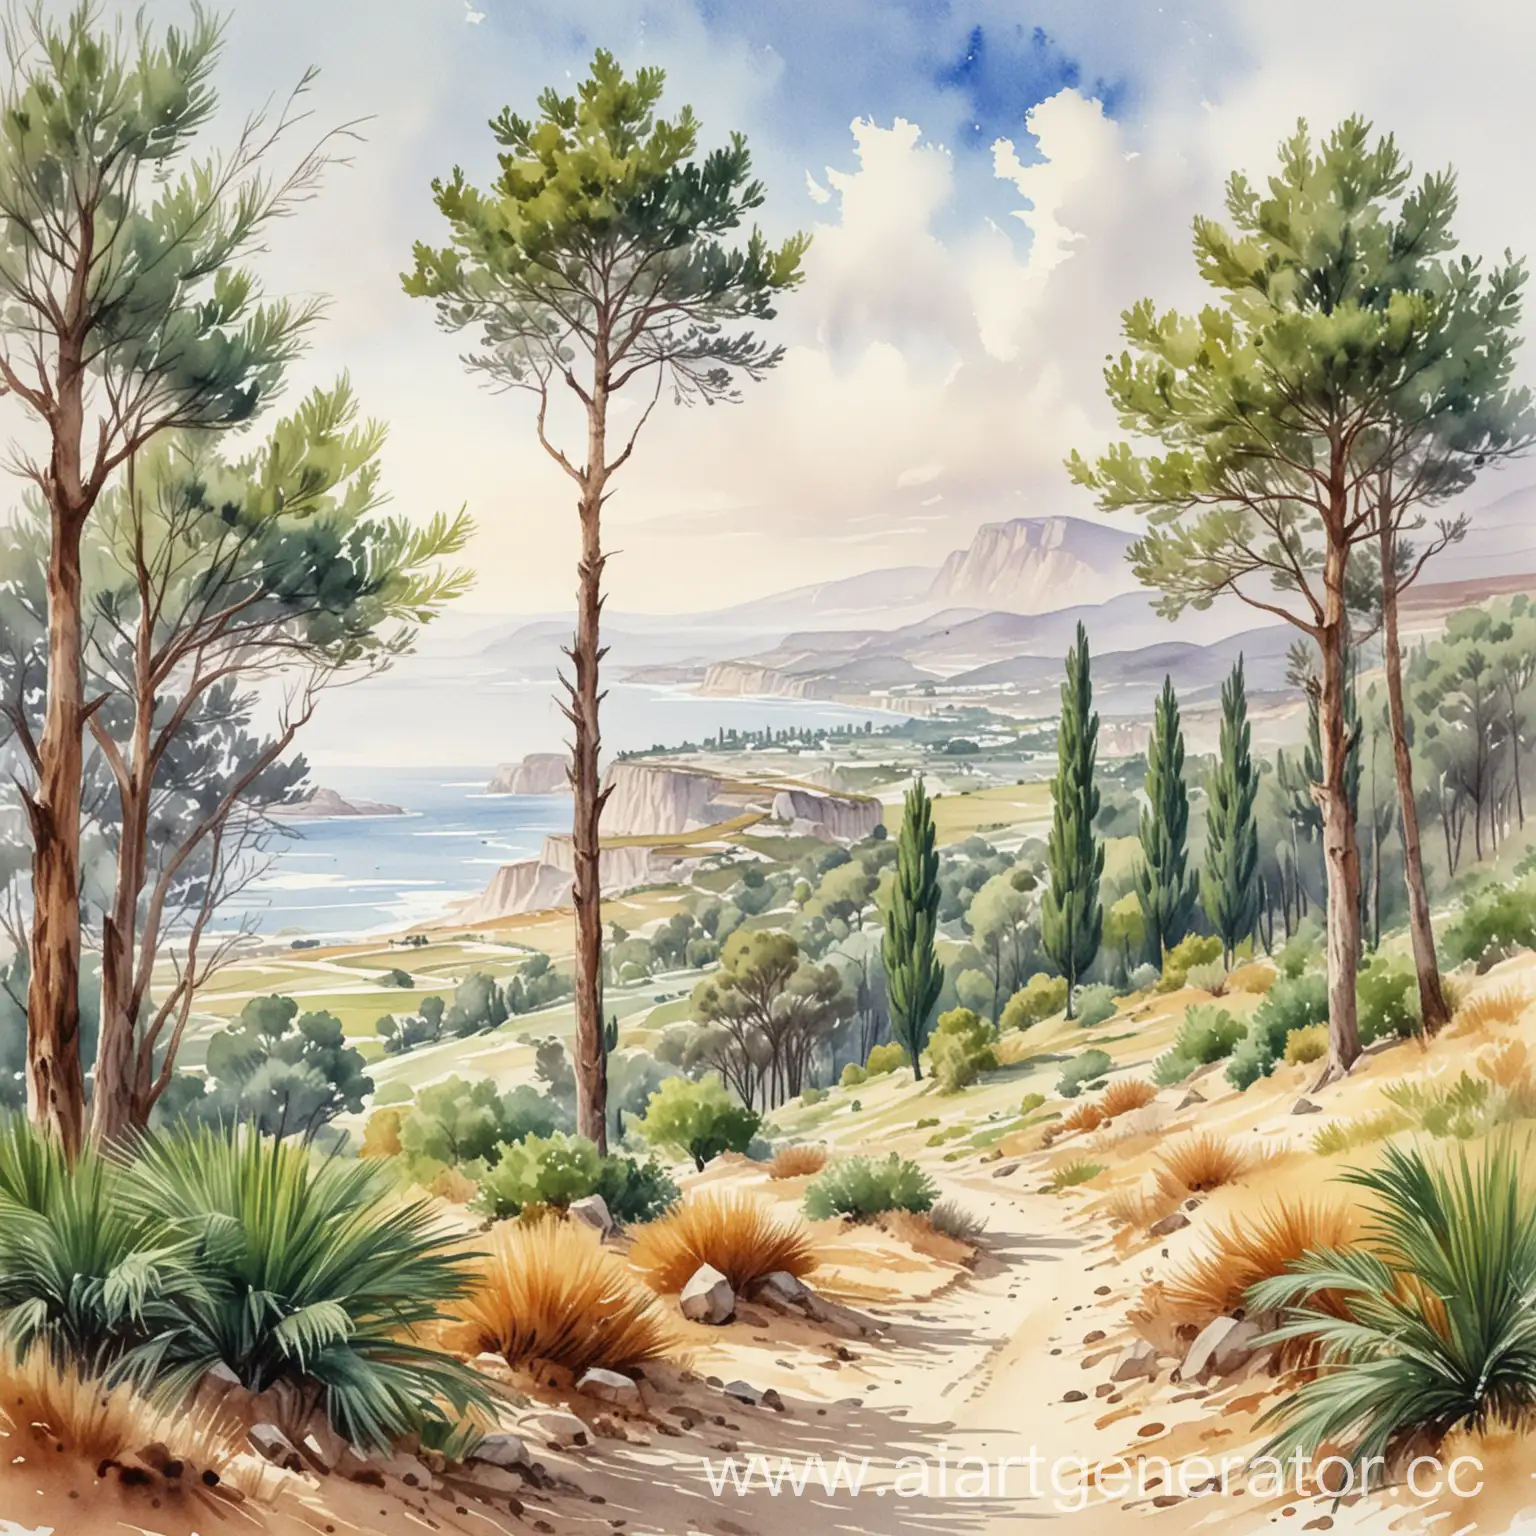 Illustration of the climatic zone of Russia, Crimea landscape with palm and cypress, watercolor drawing